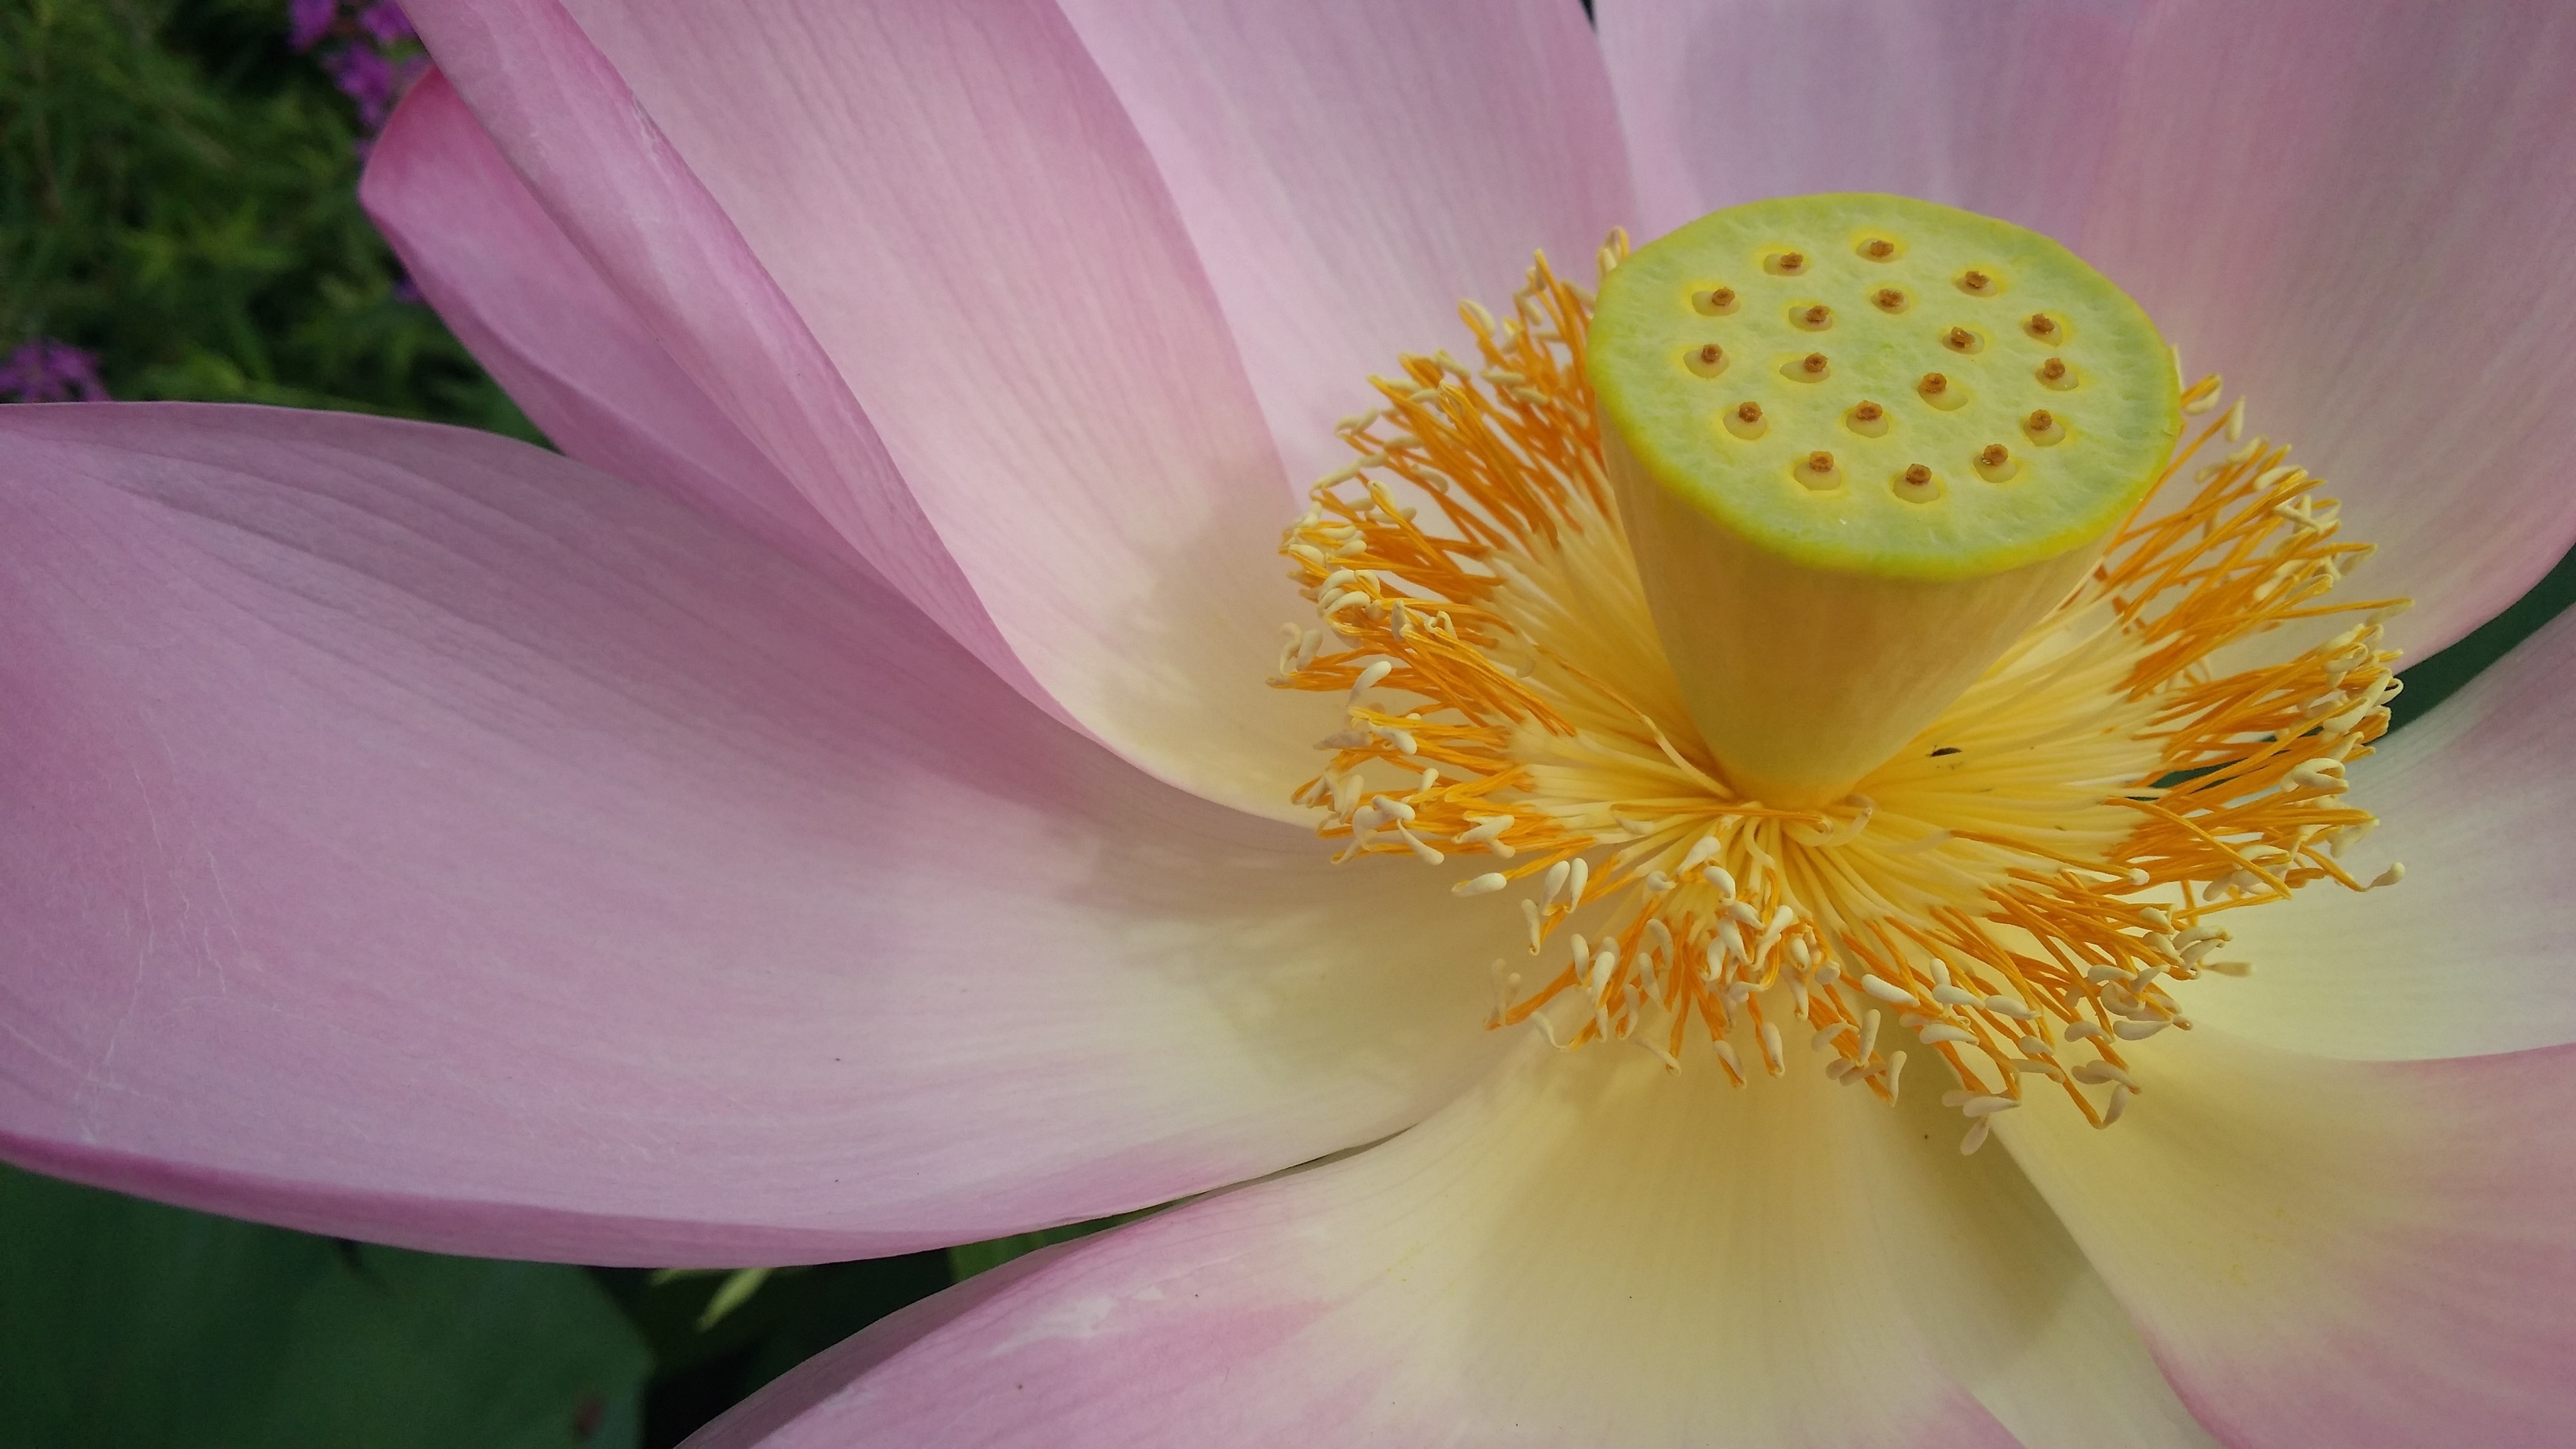 pink and yellow petaled flower in close up photo